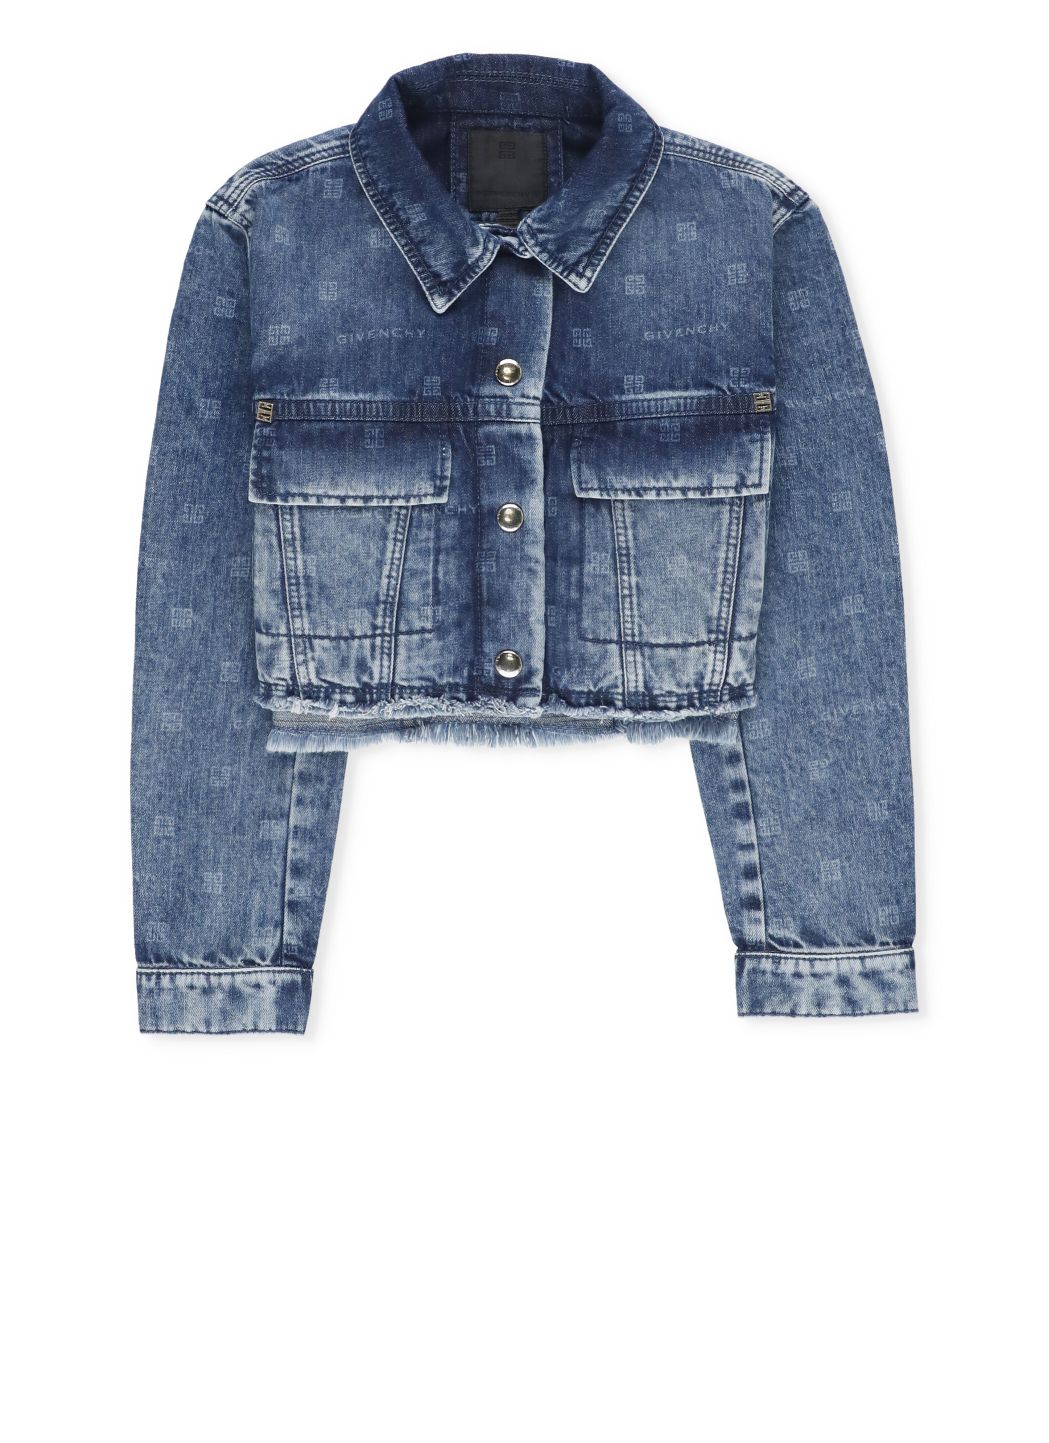 Jeans jacket with logo